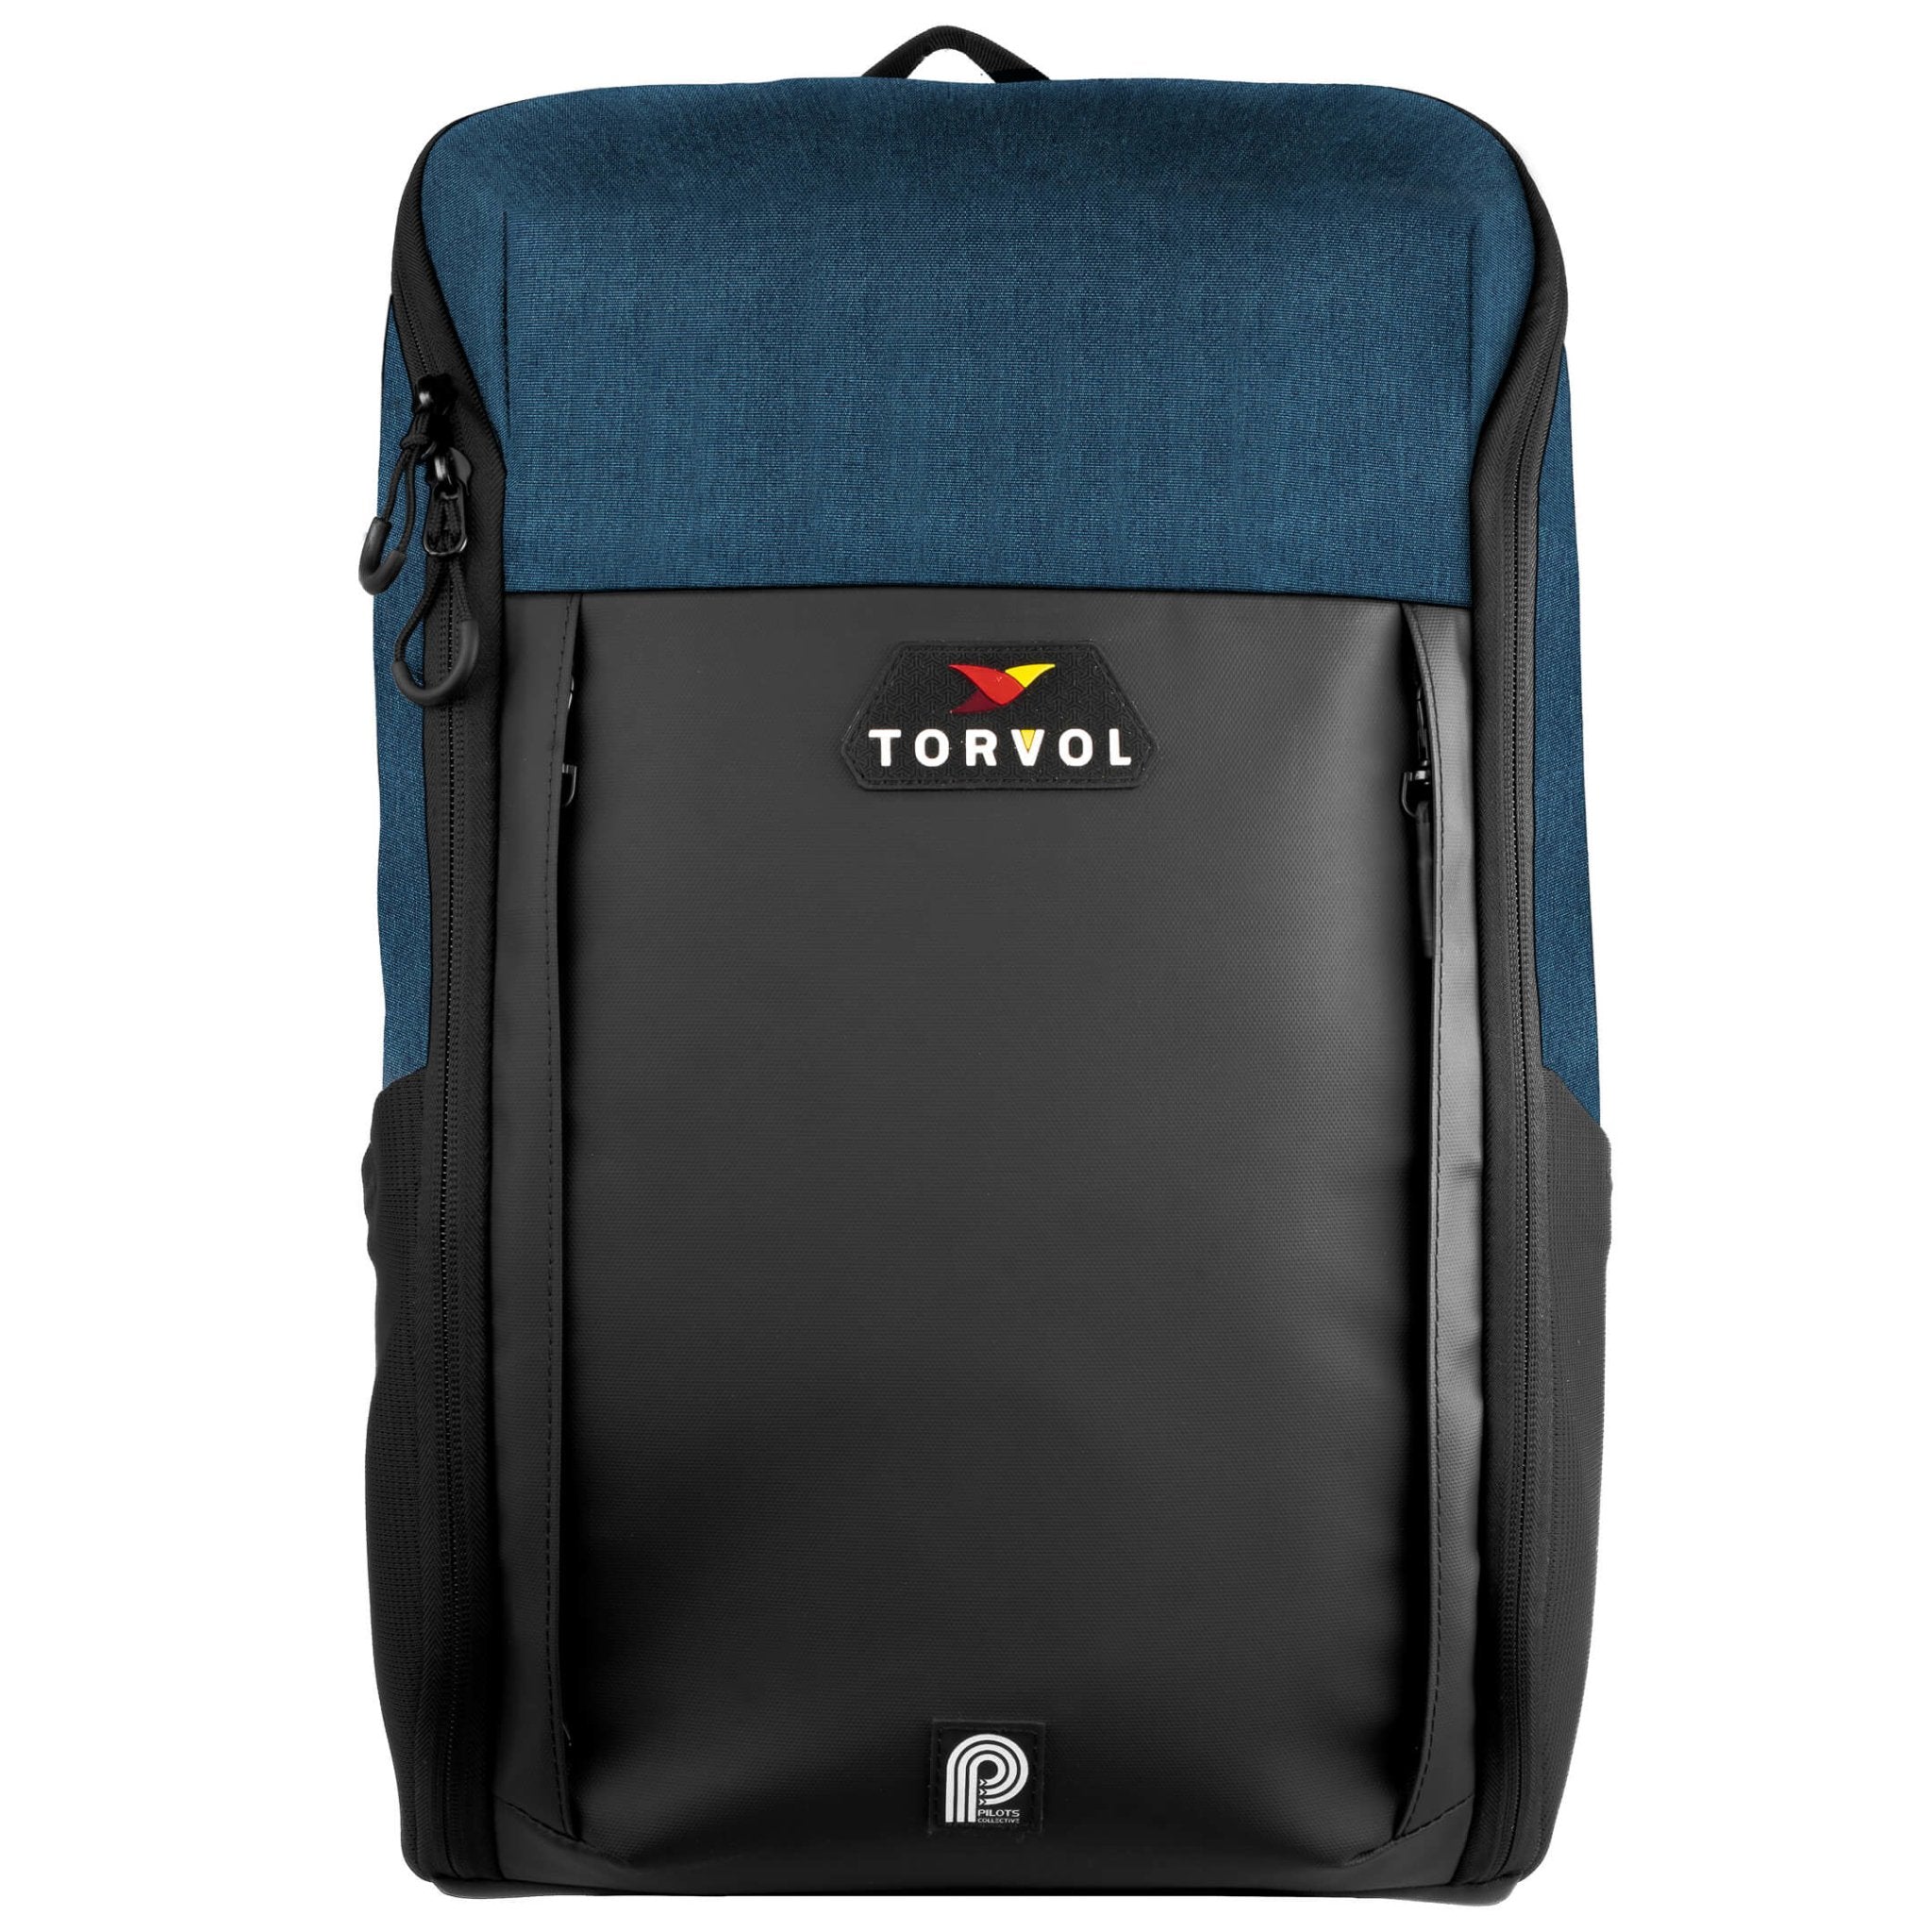 Torvol Urban Backpack - The Ultimate Daily Backpack 7 - Torvol - Drone Authority